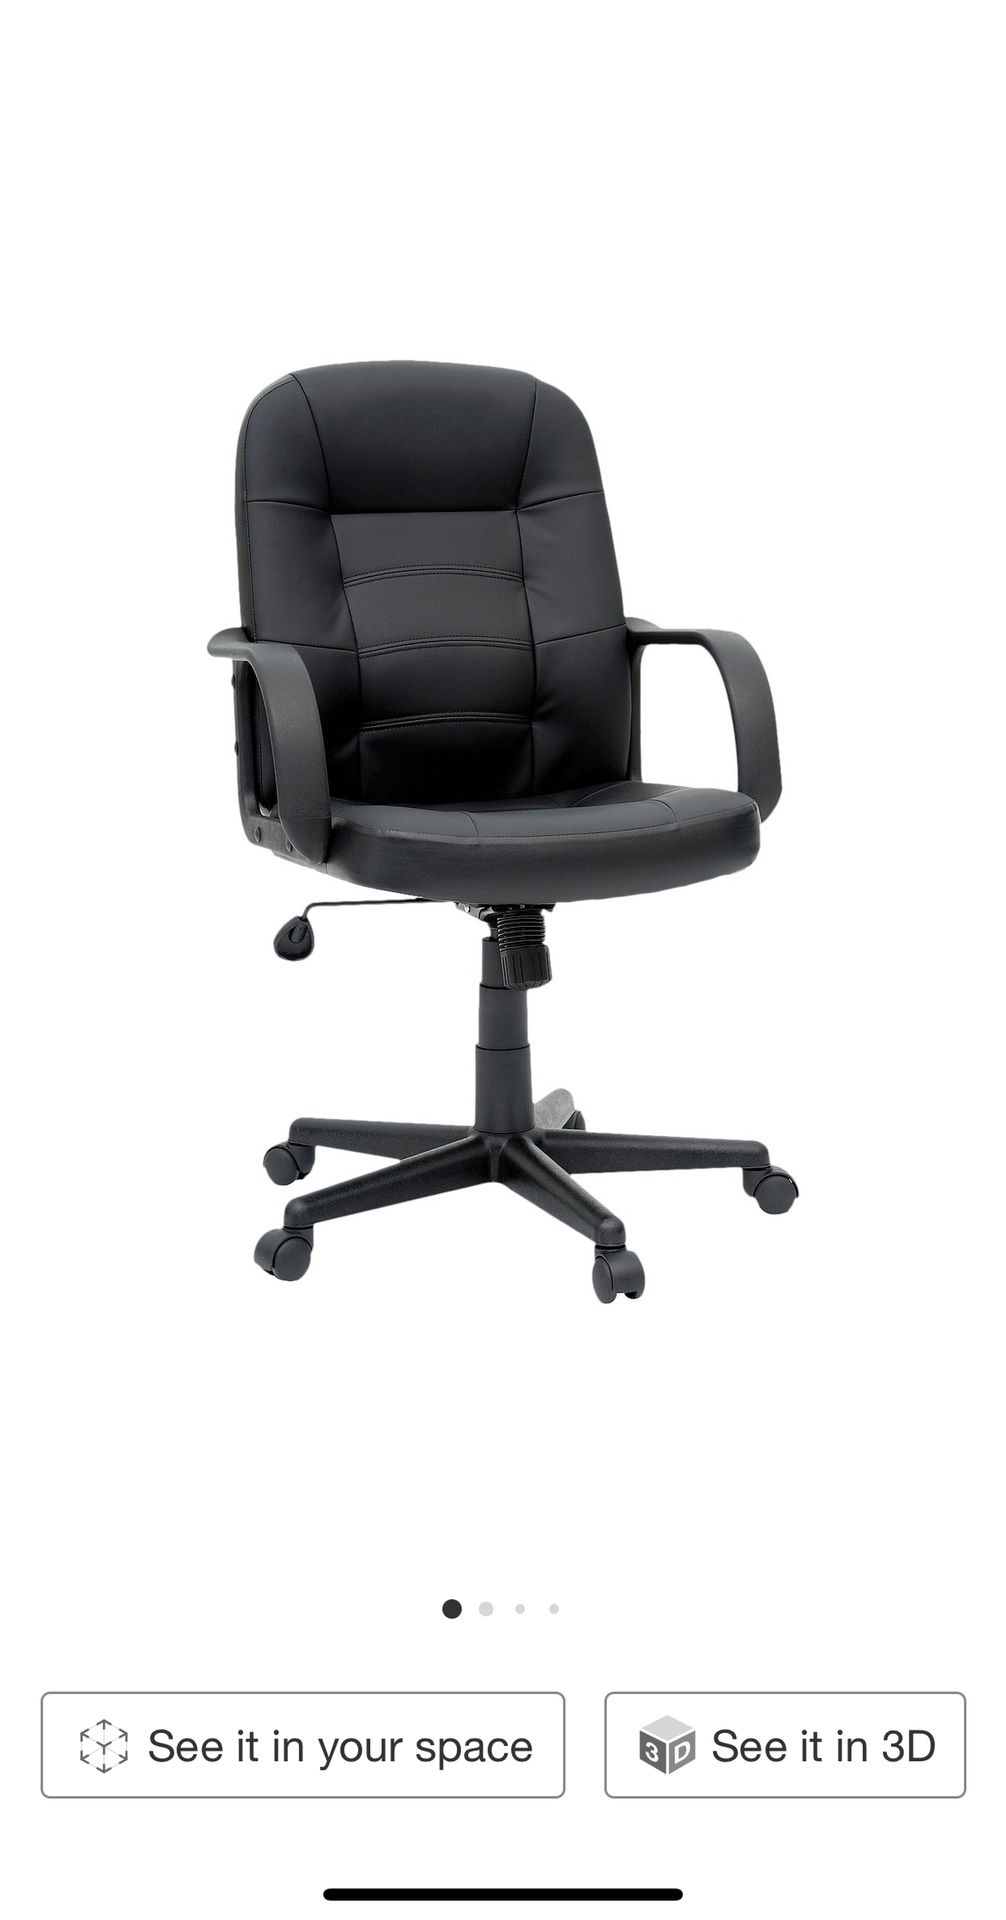 office chair bonded leather black- Room essentials